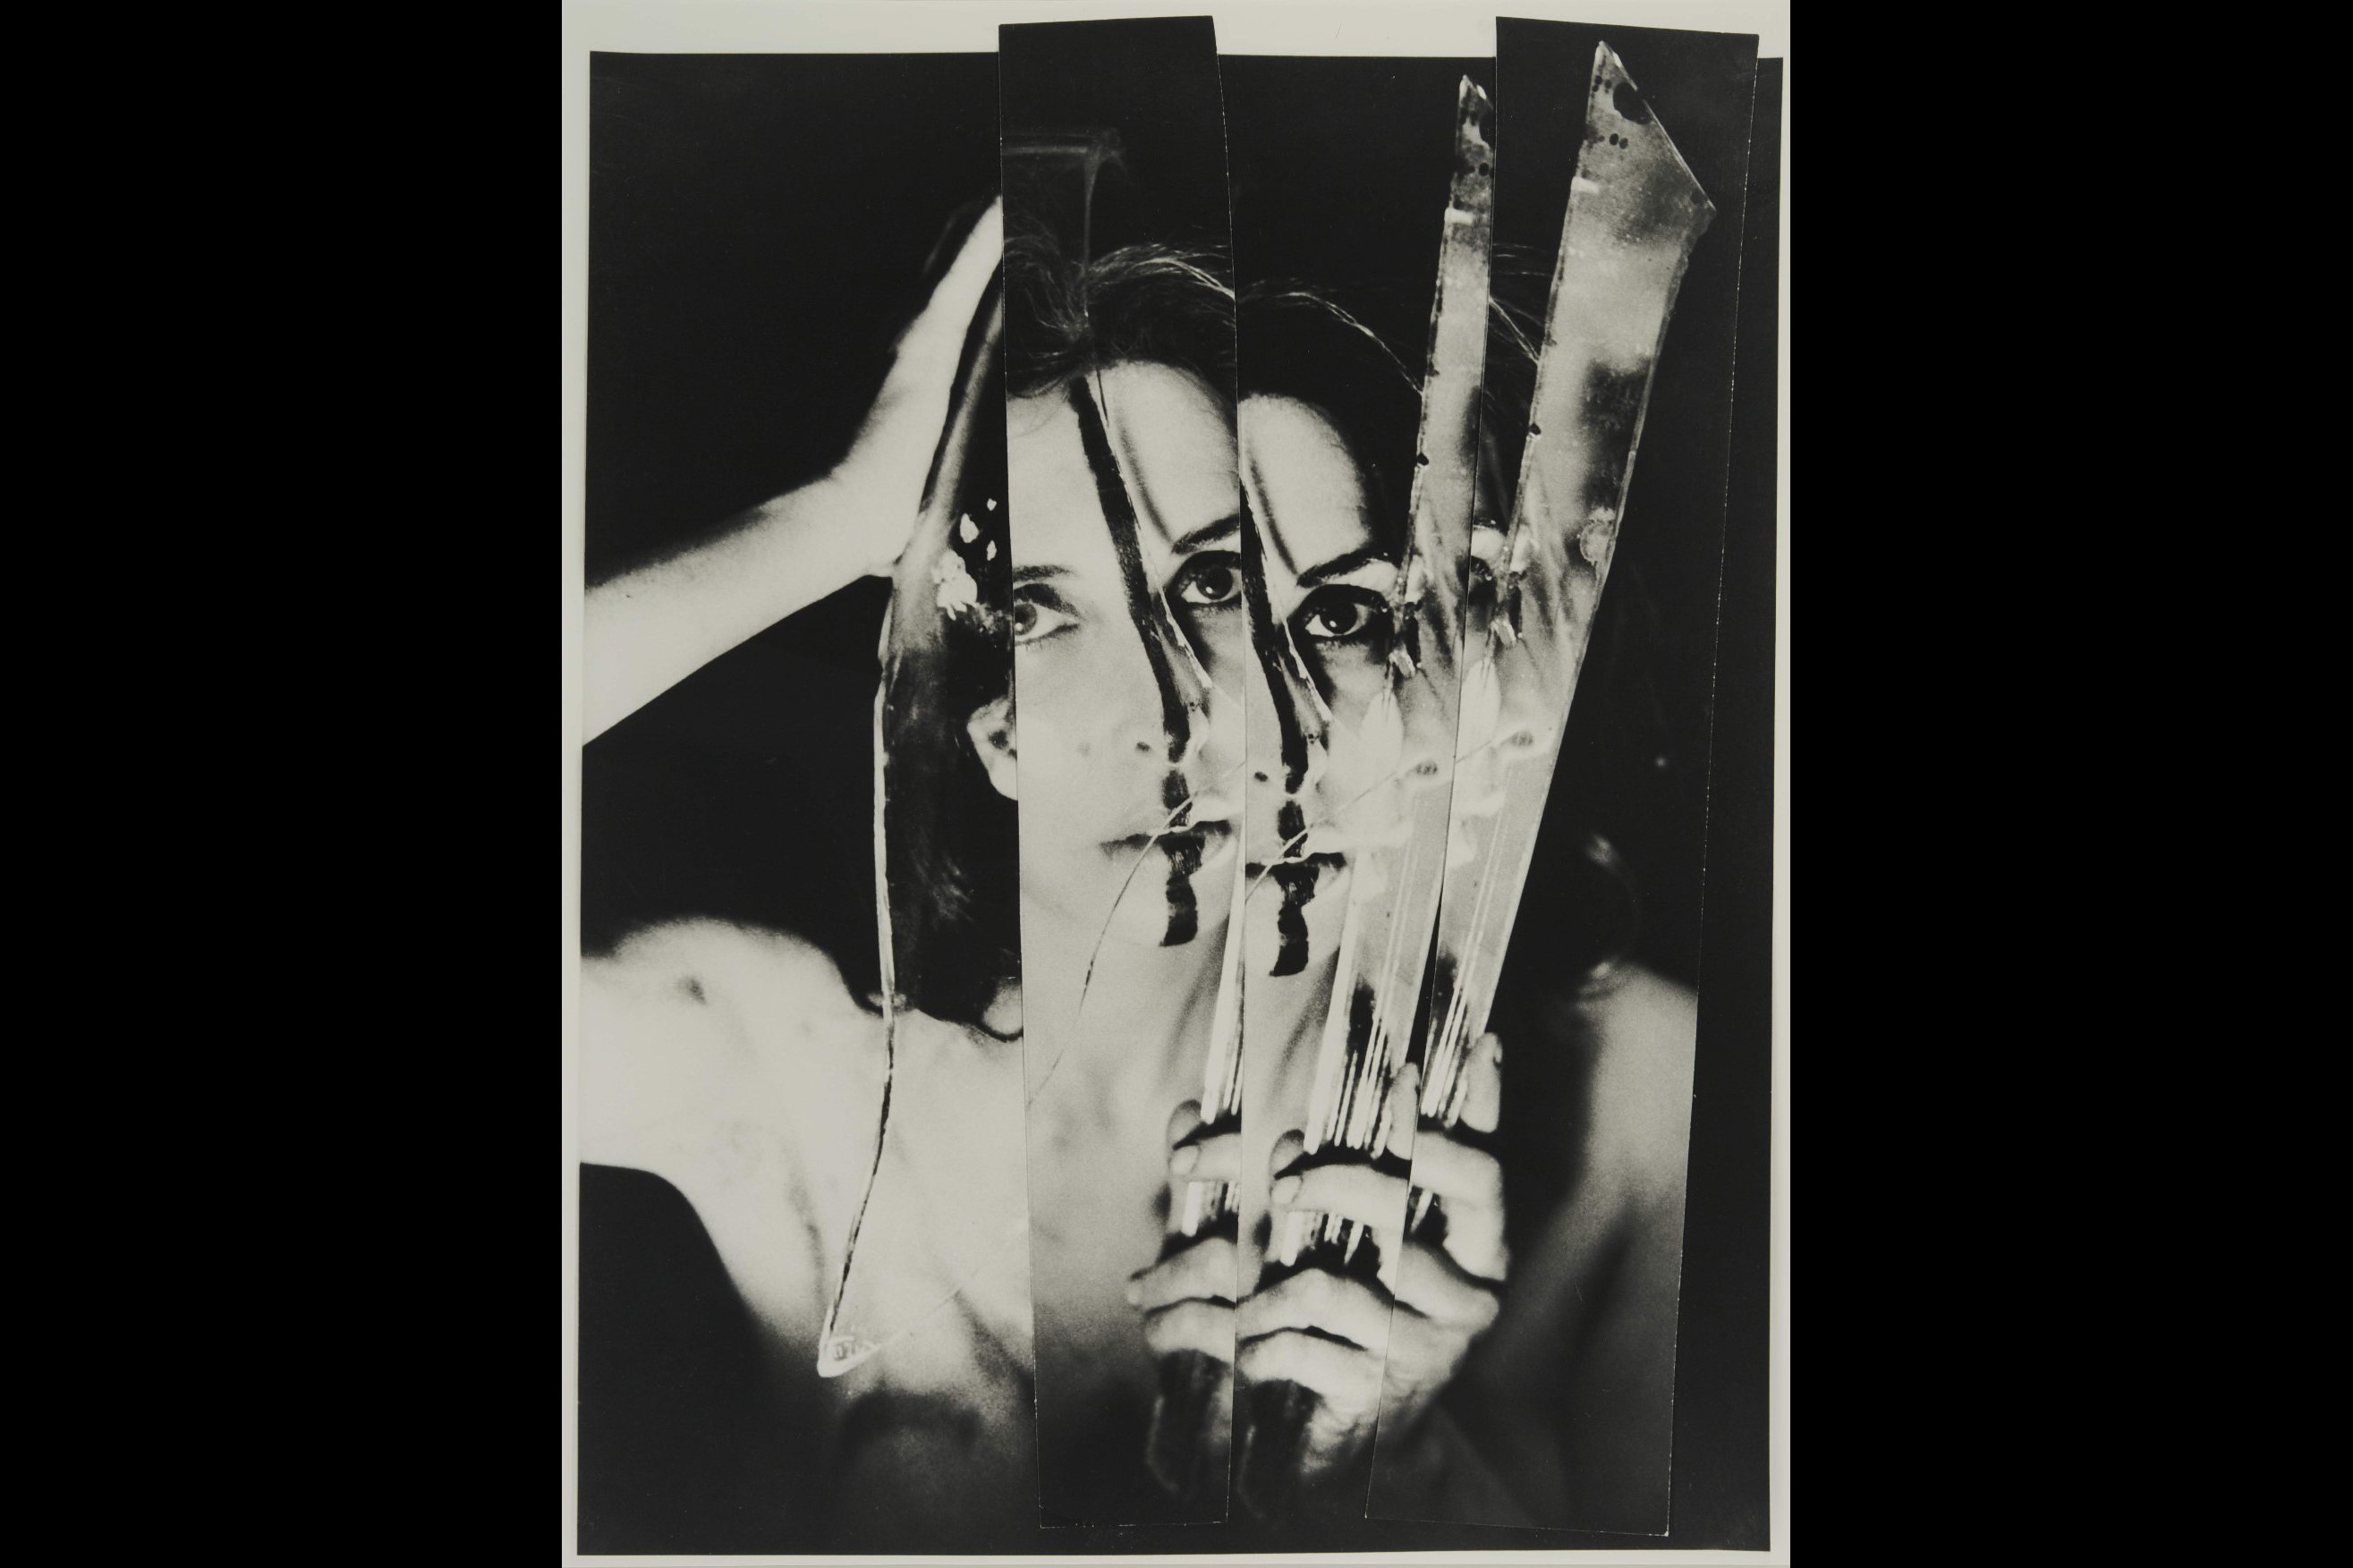 Carolee Schneemann, <em>Eye Body: 36 Transformative Actions for Camera</em>, 1963. Gelatin silver print, printed 2005 61 × 50.8 cm. Photograph by Erró. Courtesy of the Carolee Schneemann Foundation and Galerie Lelong & Co., Hales Gallery, and P.P.O.W, New York and © Carolee Schneemann Foundation / ARS, New York and DACS, London 2022. Photograph Erró © ADAGP, Paris and DACS, London 2022